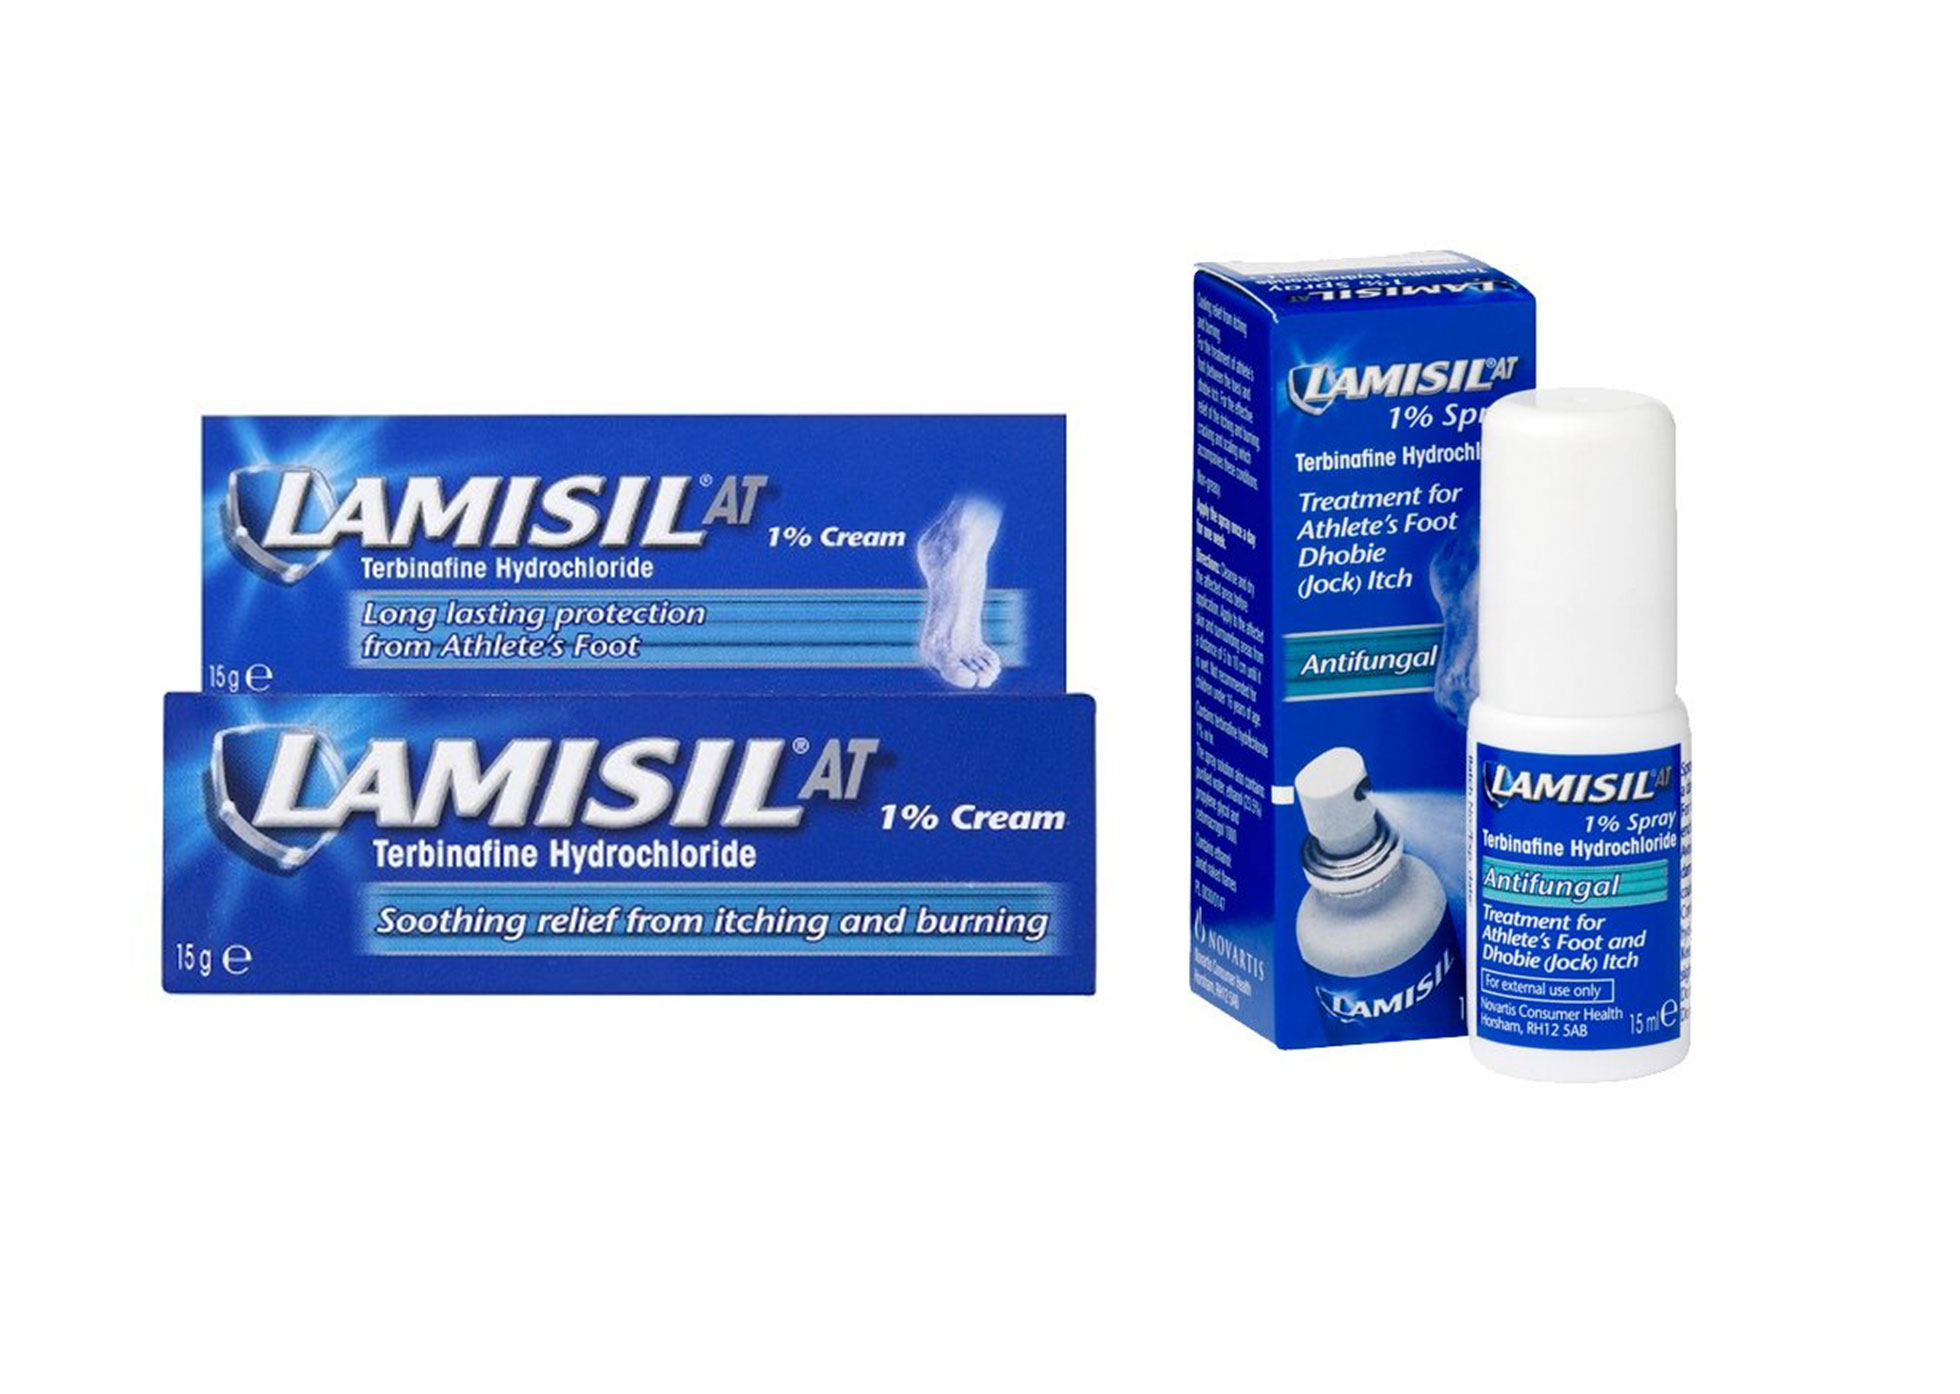 Lamisil 1% AT (Terbinafine Hydrochloride) - 'Once' 4g Tub - Fungal Treatment